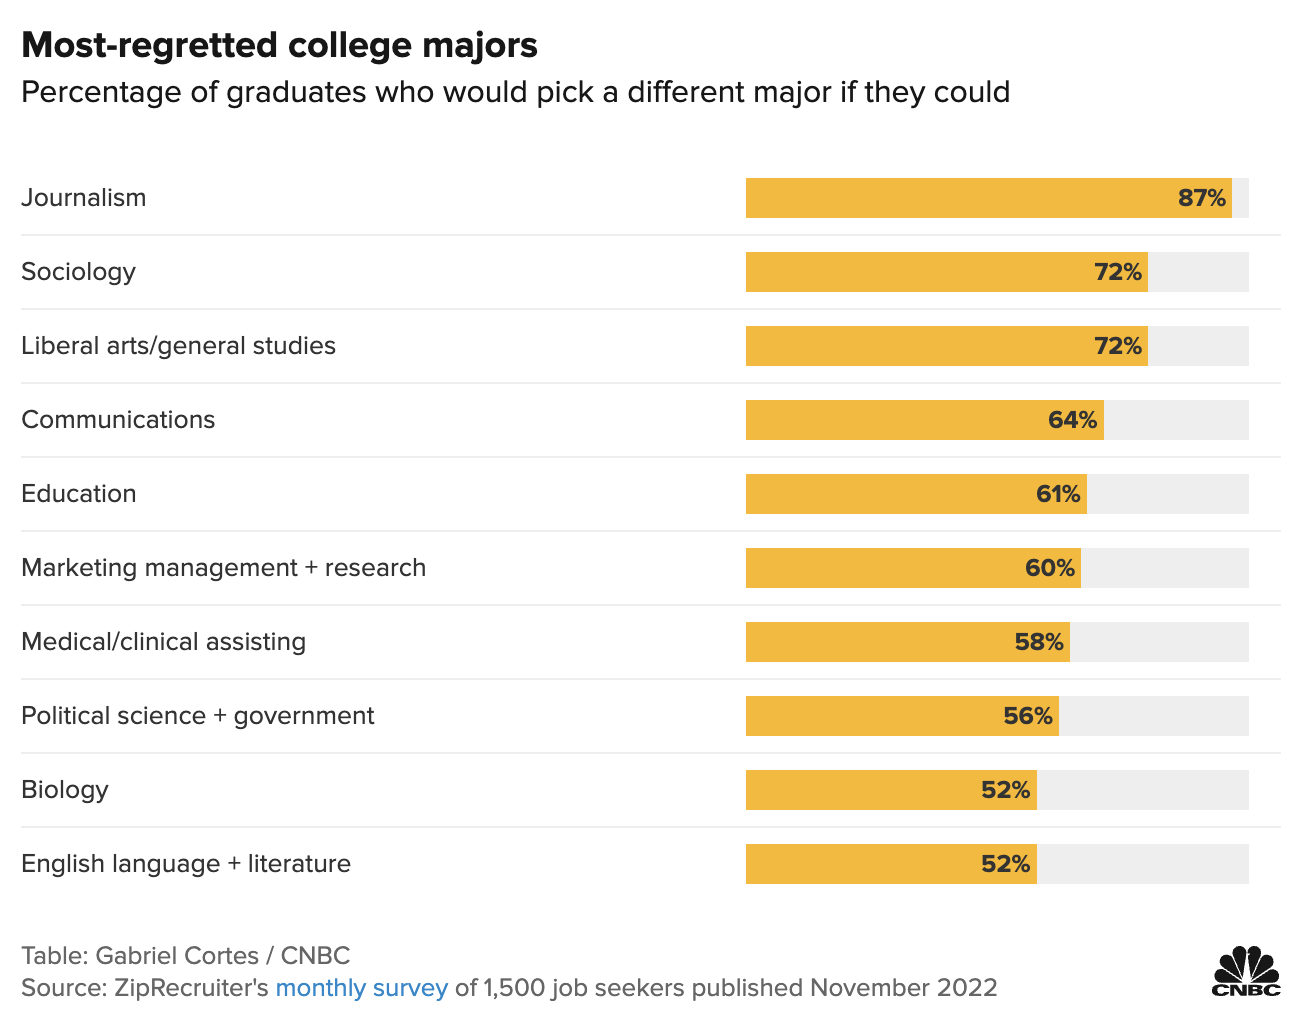 Most-Regretted College Majors